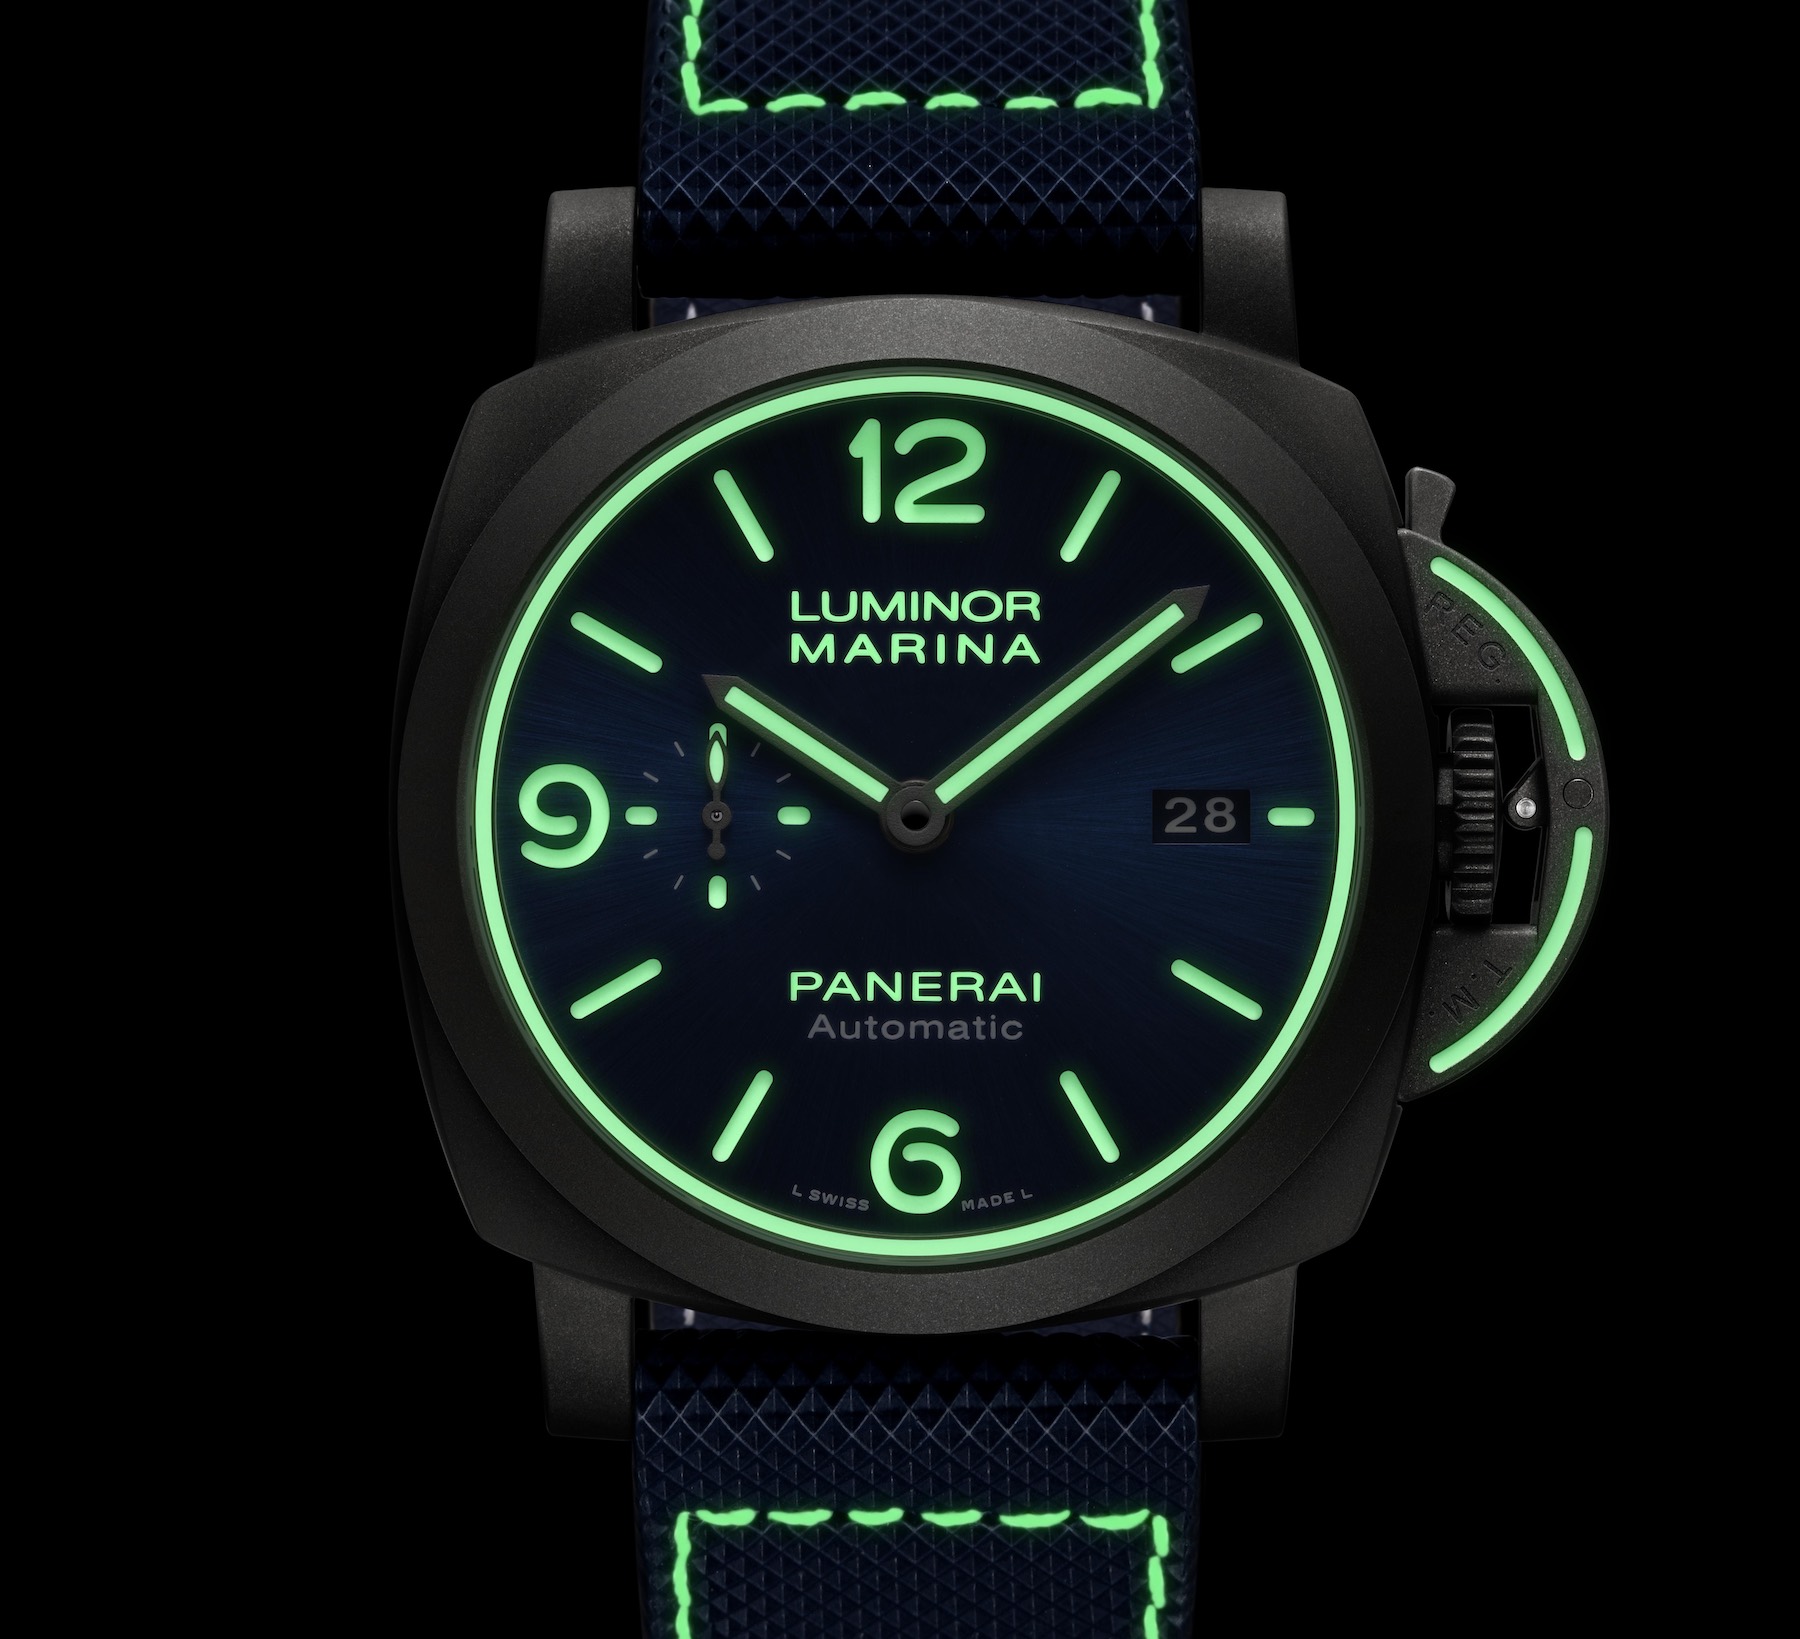 INTRODUCING: The Panerai Luminor Marina PAM01117, a watch guaranteed to last for the full term of your natural life